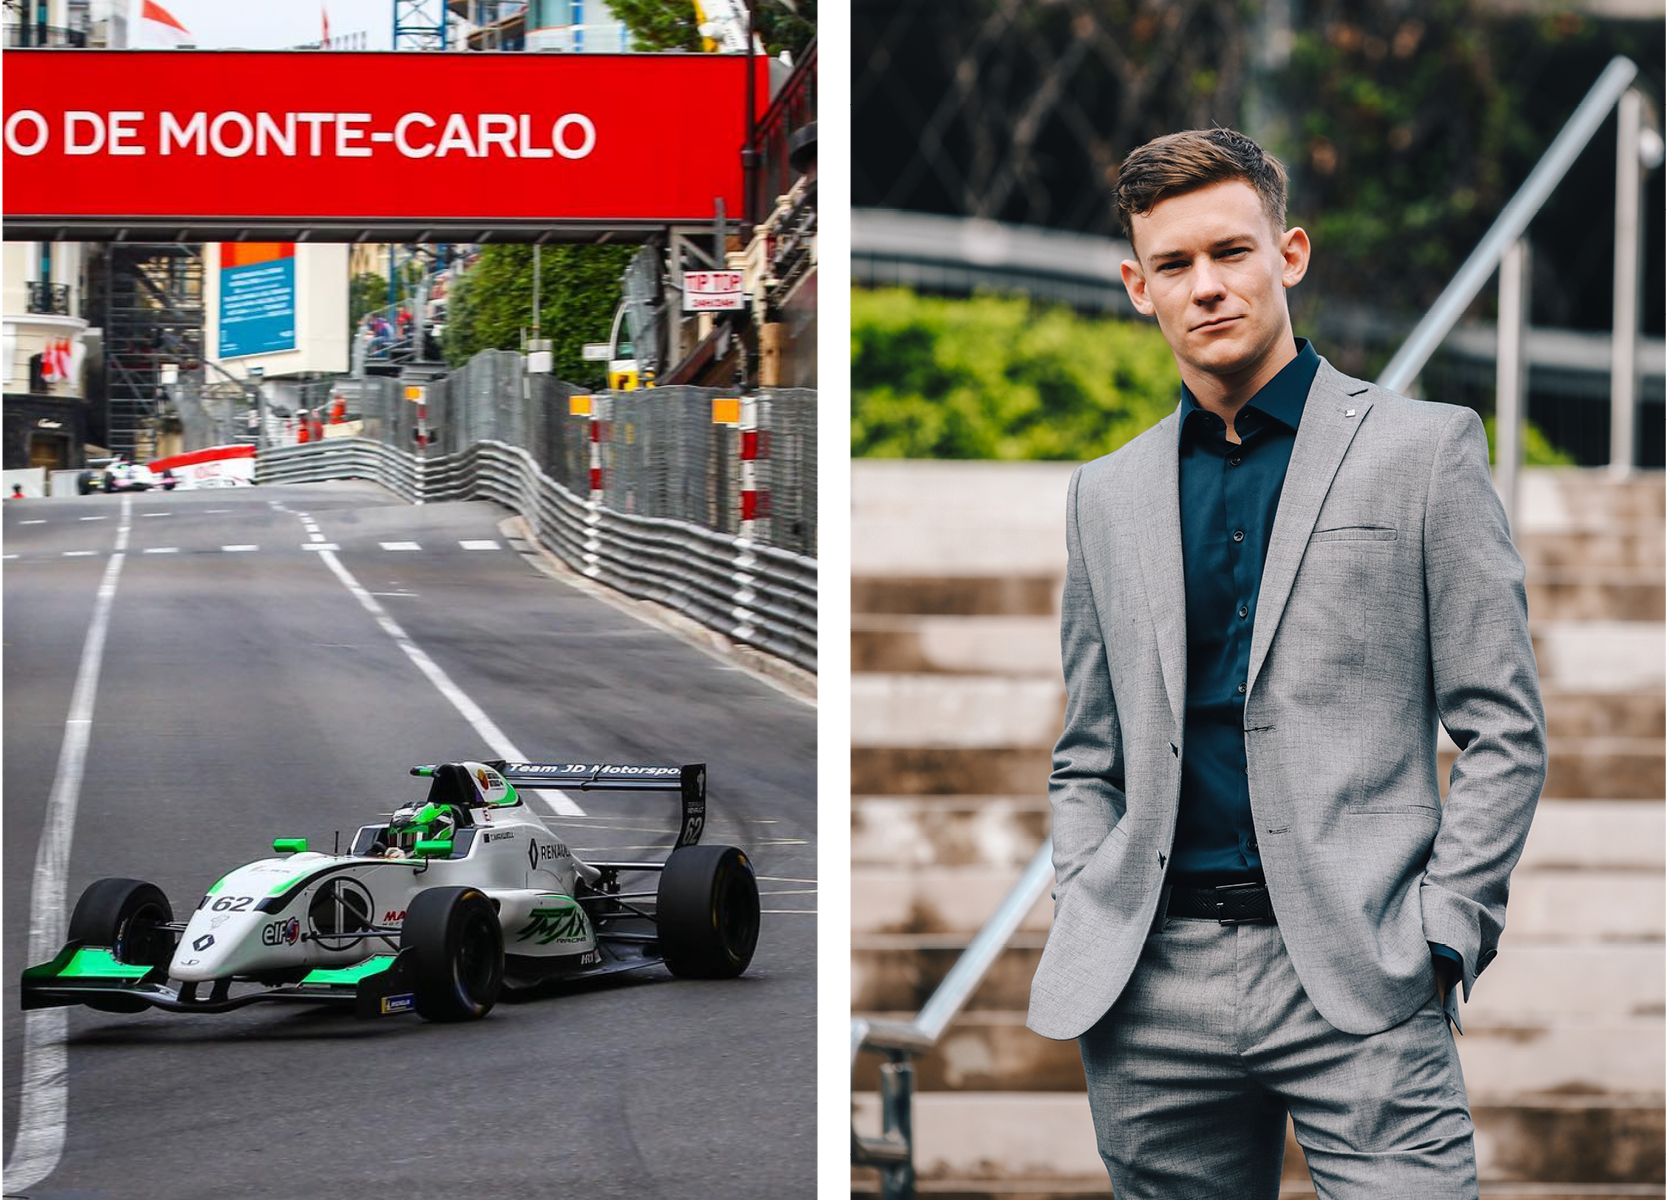 Images of Thomas Maxwell in POLITIX dark grey suit smiling next to racecar in Monte Carlo